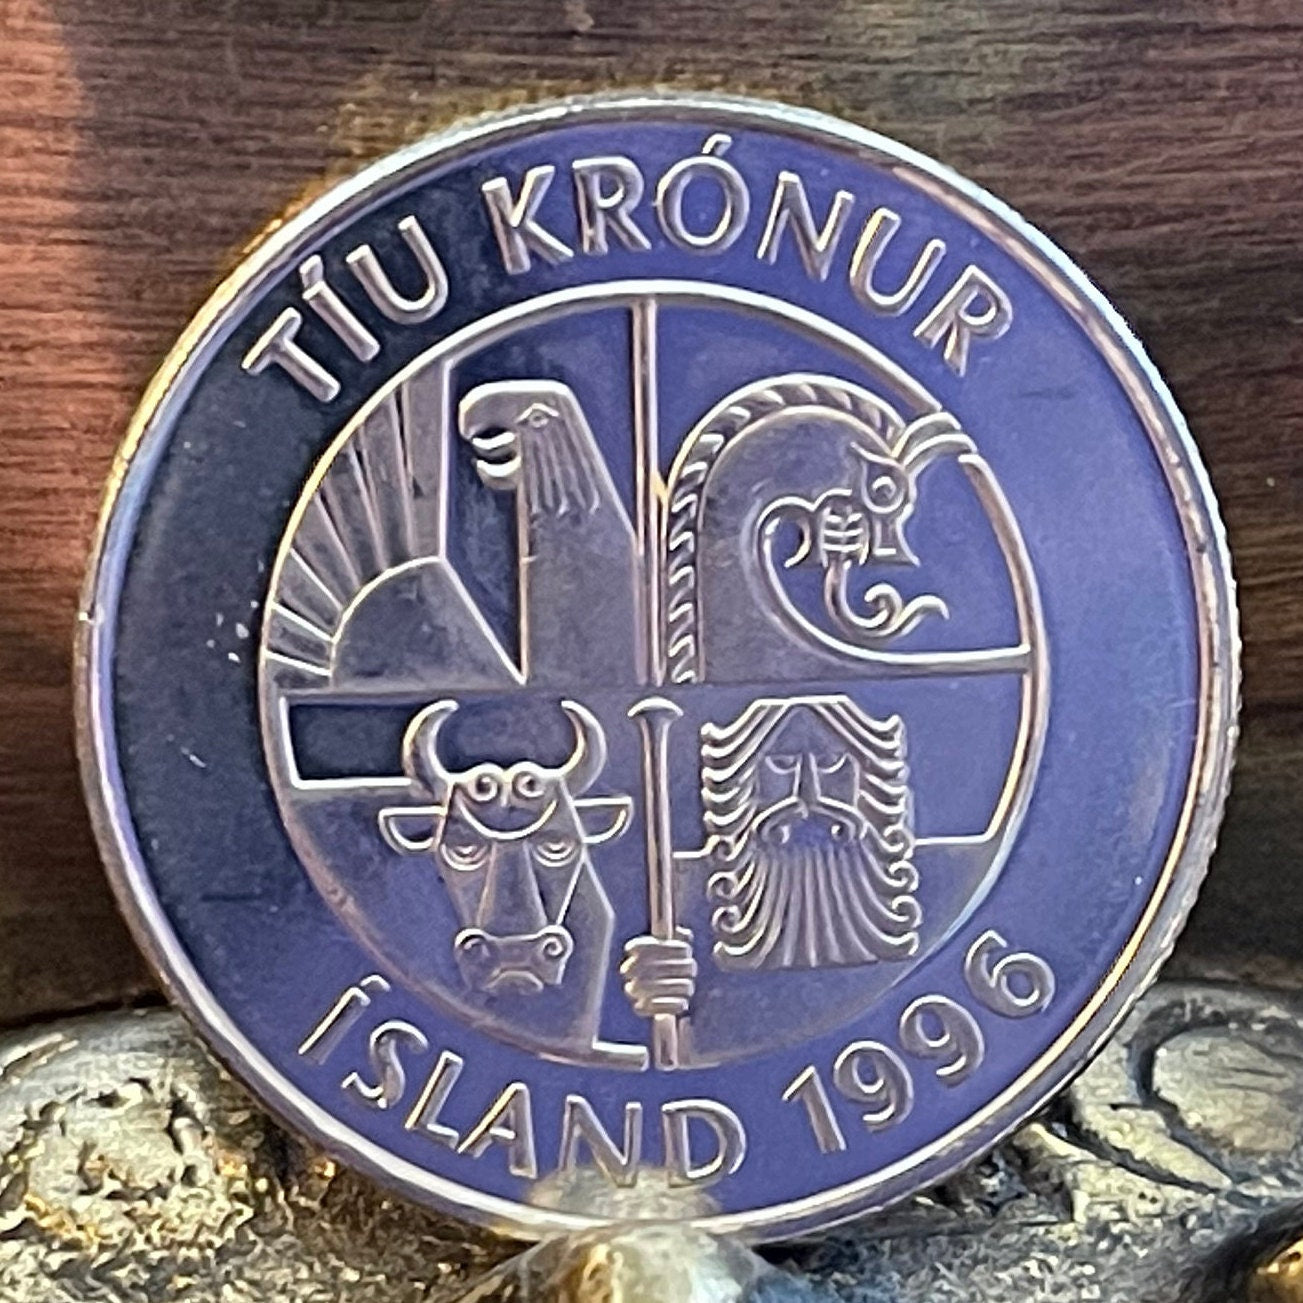 Landvaettir Protector Spirits & Capelin Fish 10 Kronur Iceland Authentic Coin Money for Jewelry and Craft Making (Smelt)